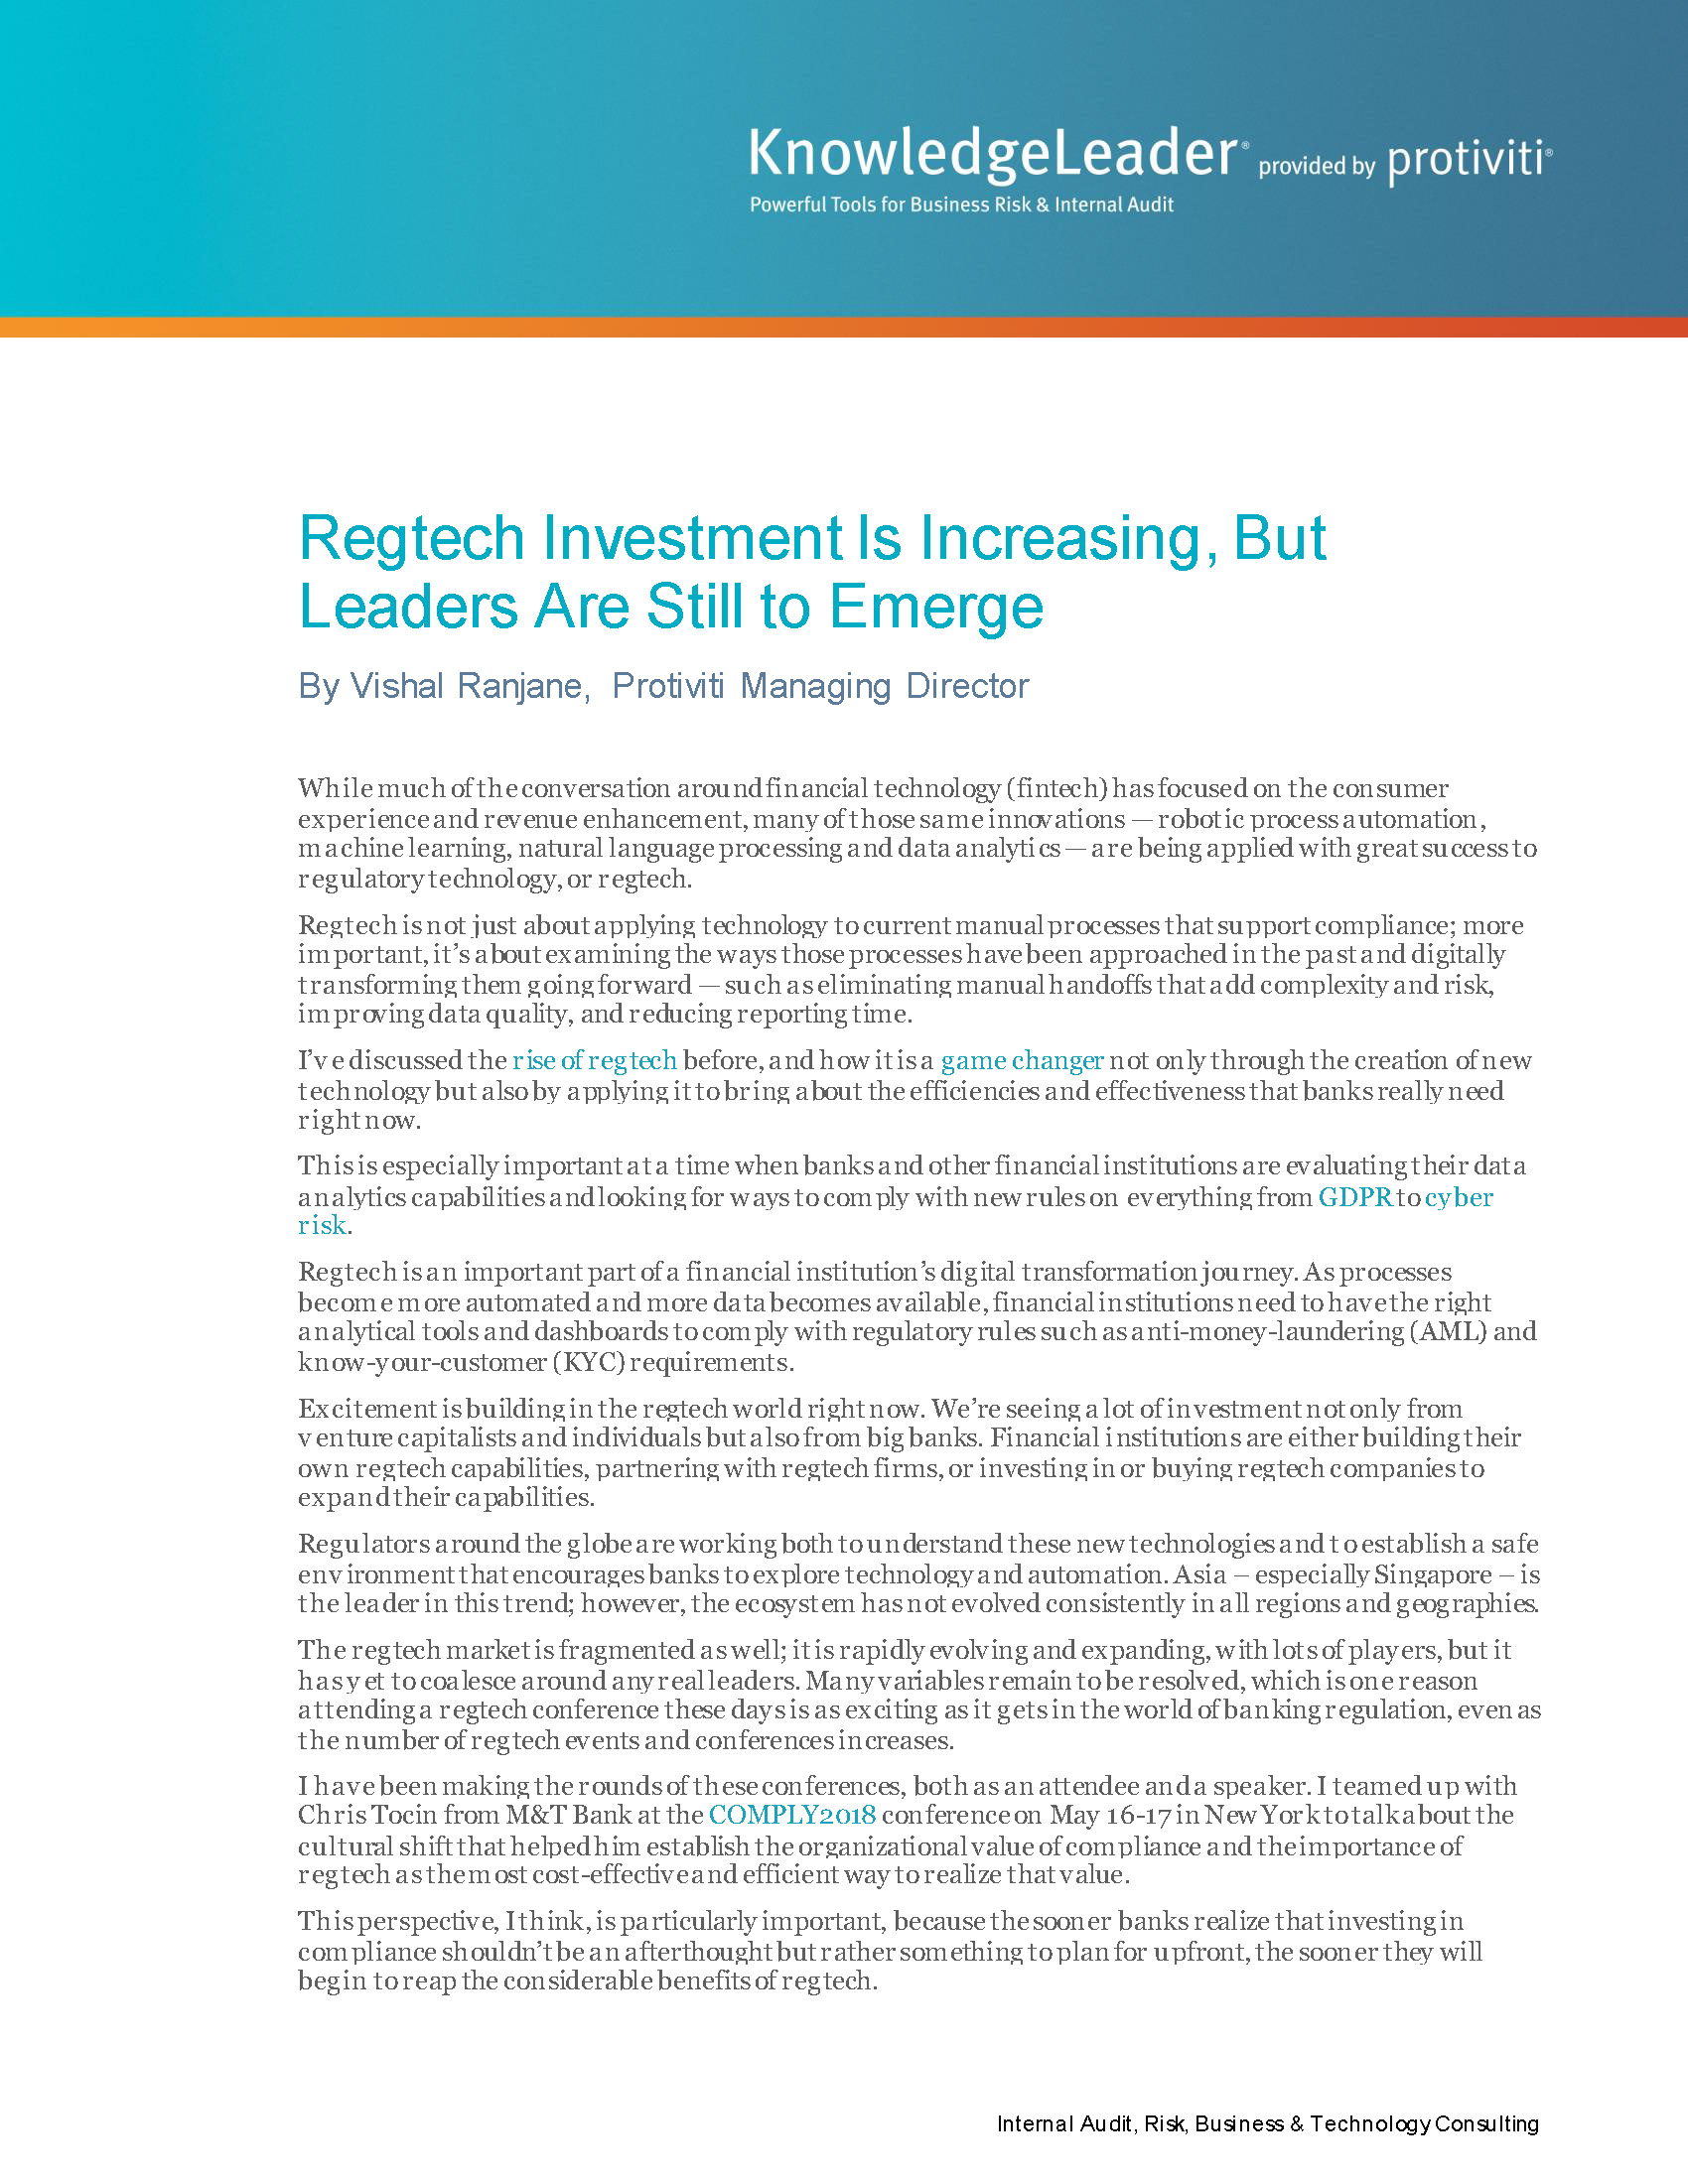 Screenshot of the first page of Regtech Investment Is Increasing, But Leaders Are Still to Emerge